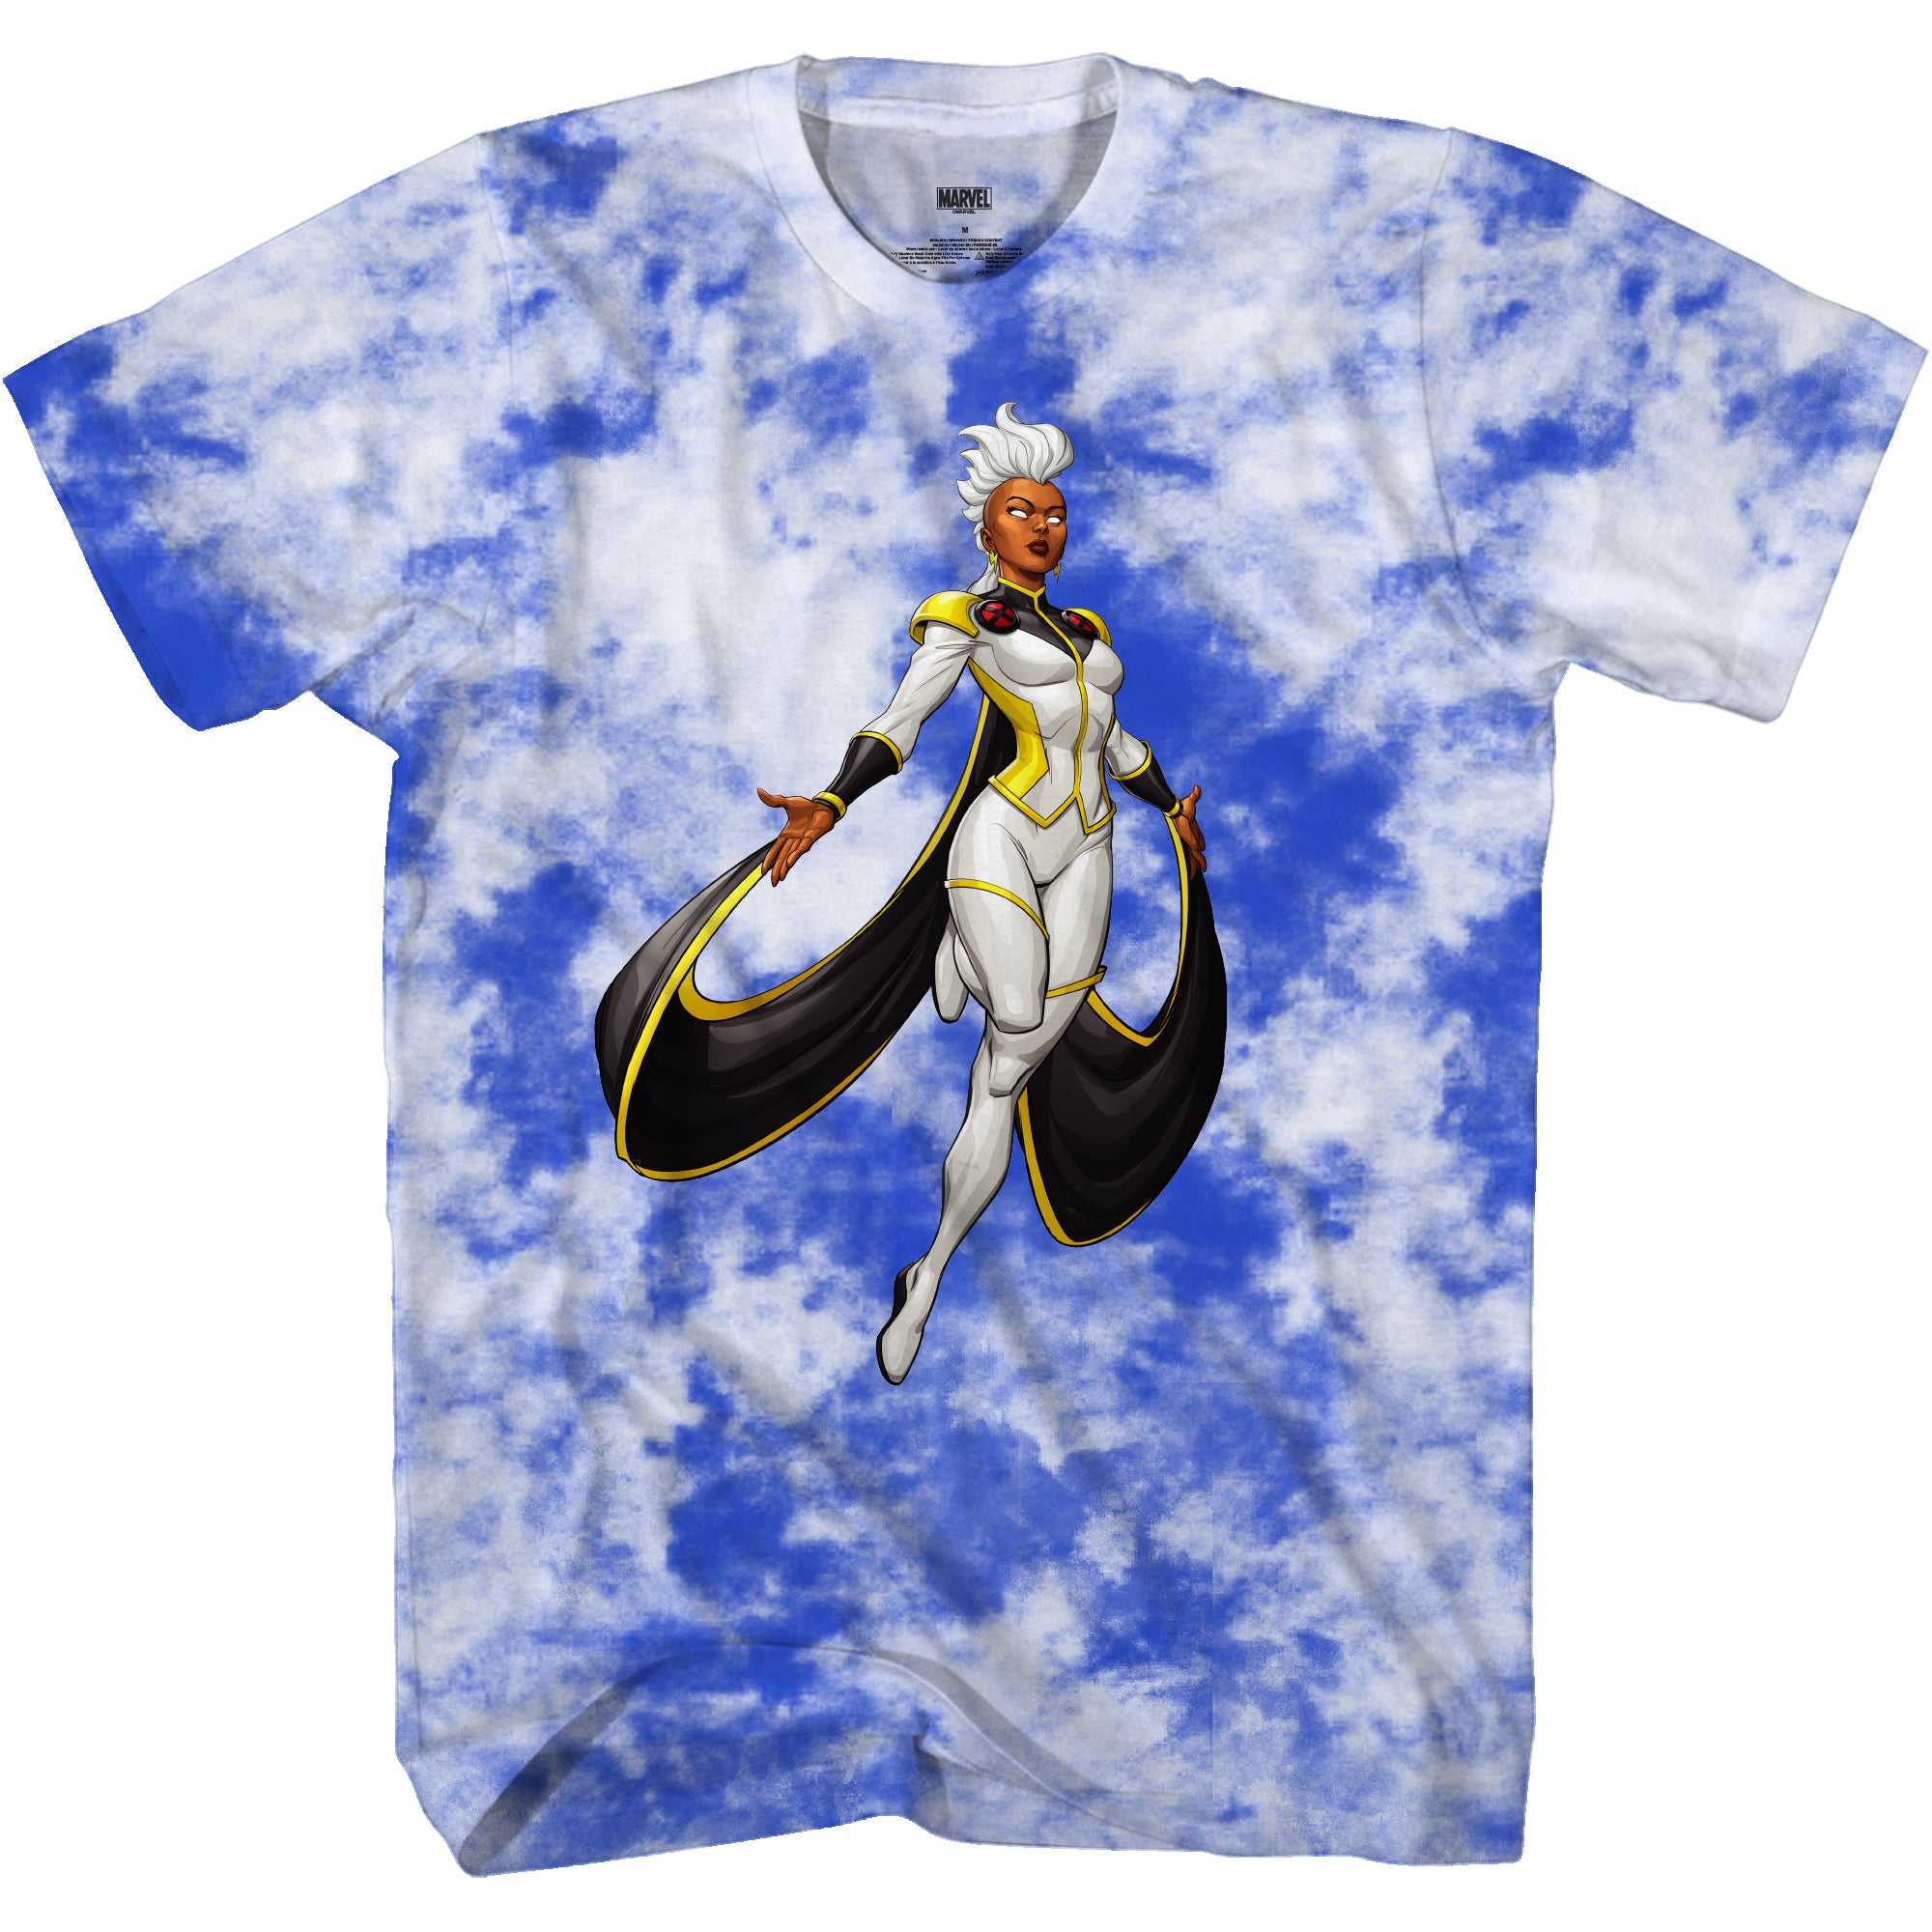 Rise Clouds Marvel Comics Adult T-Shirt – YourFavoriteTShirts